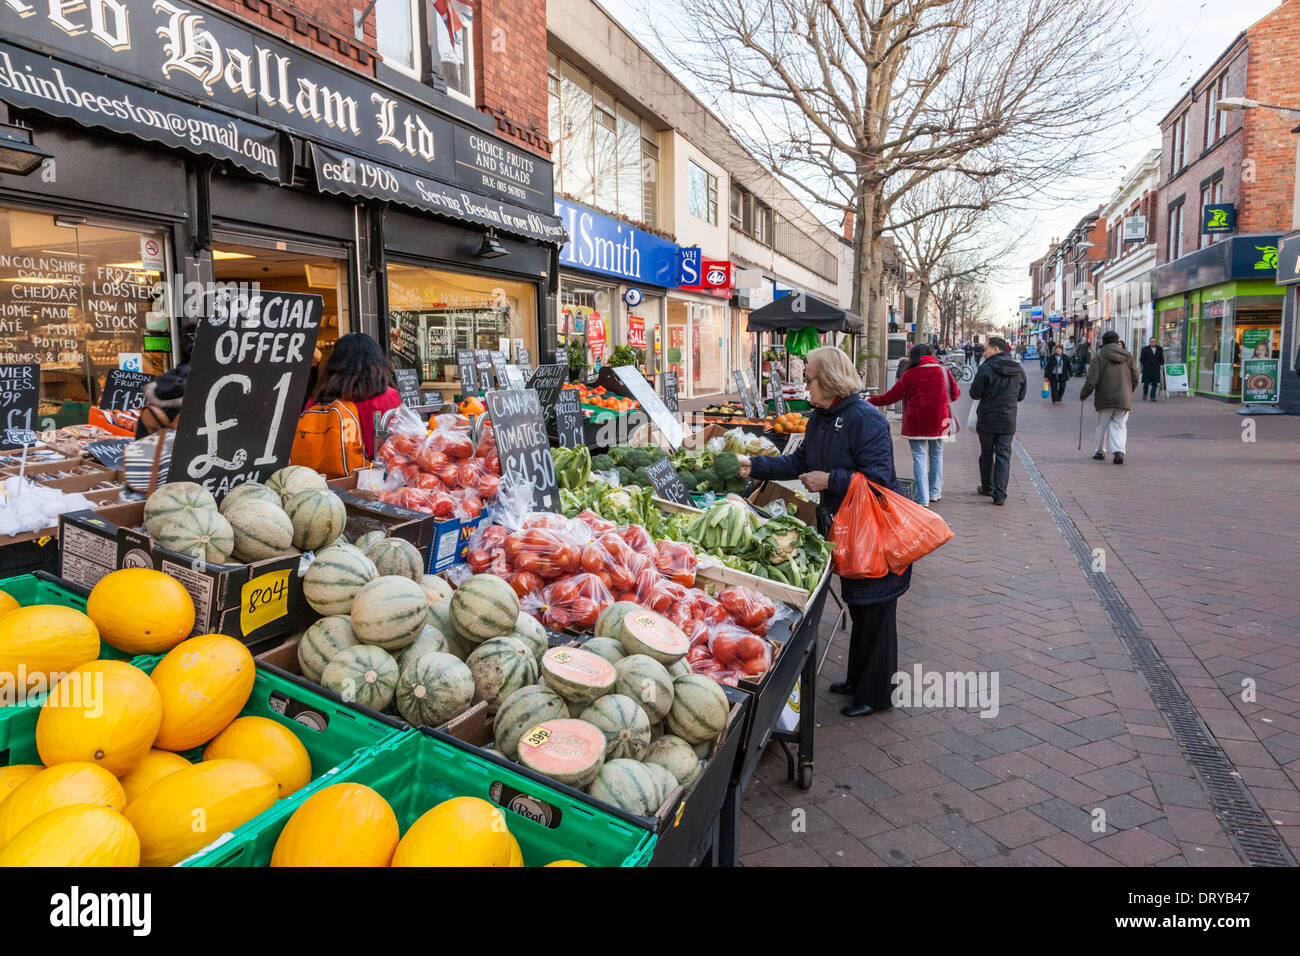 Person shopping for fruit and veg at a greengrocers among other local shops on a pedestrianised street, Beeston, Nottinghamshire, England, UK Stock Photo